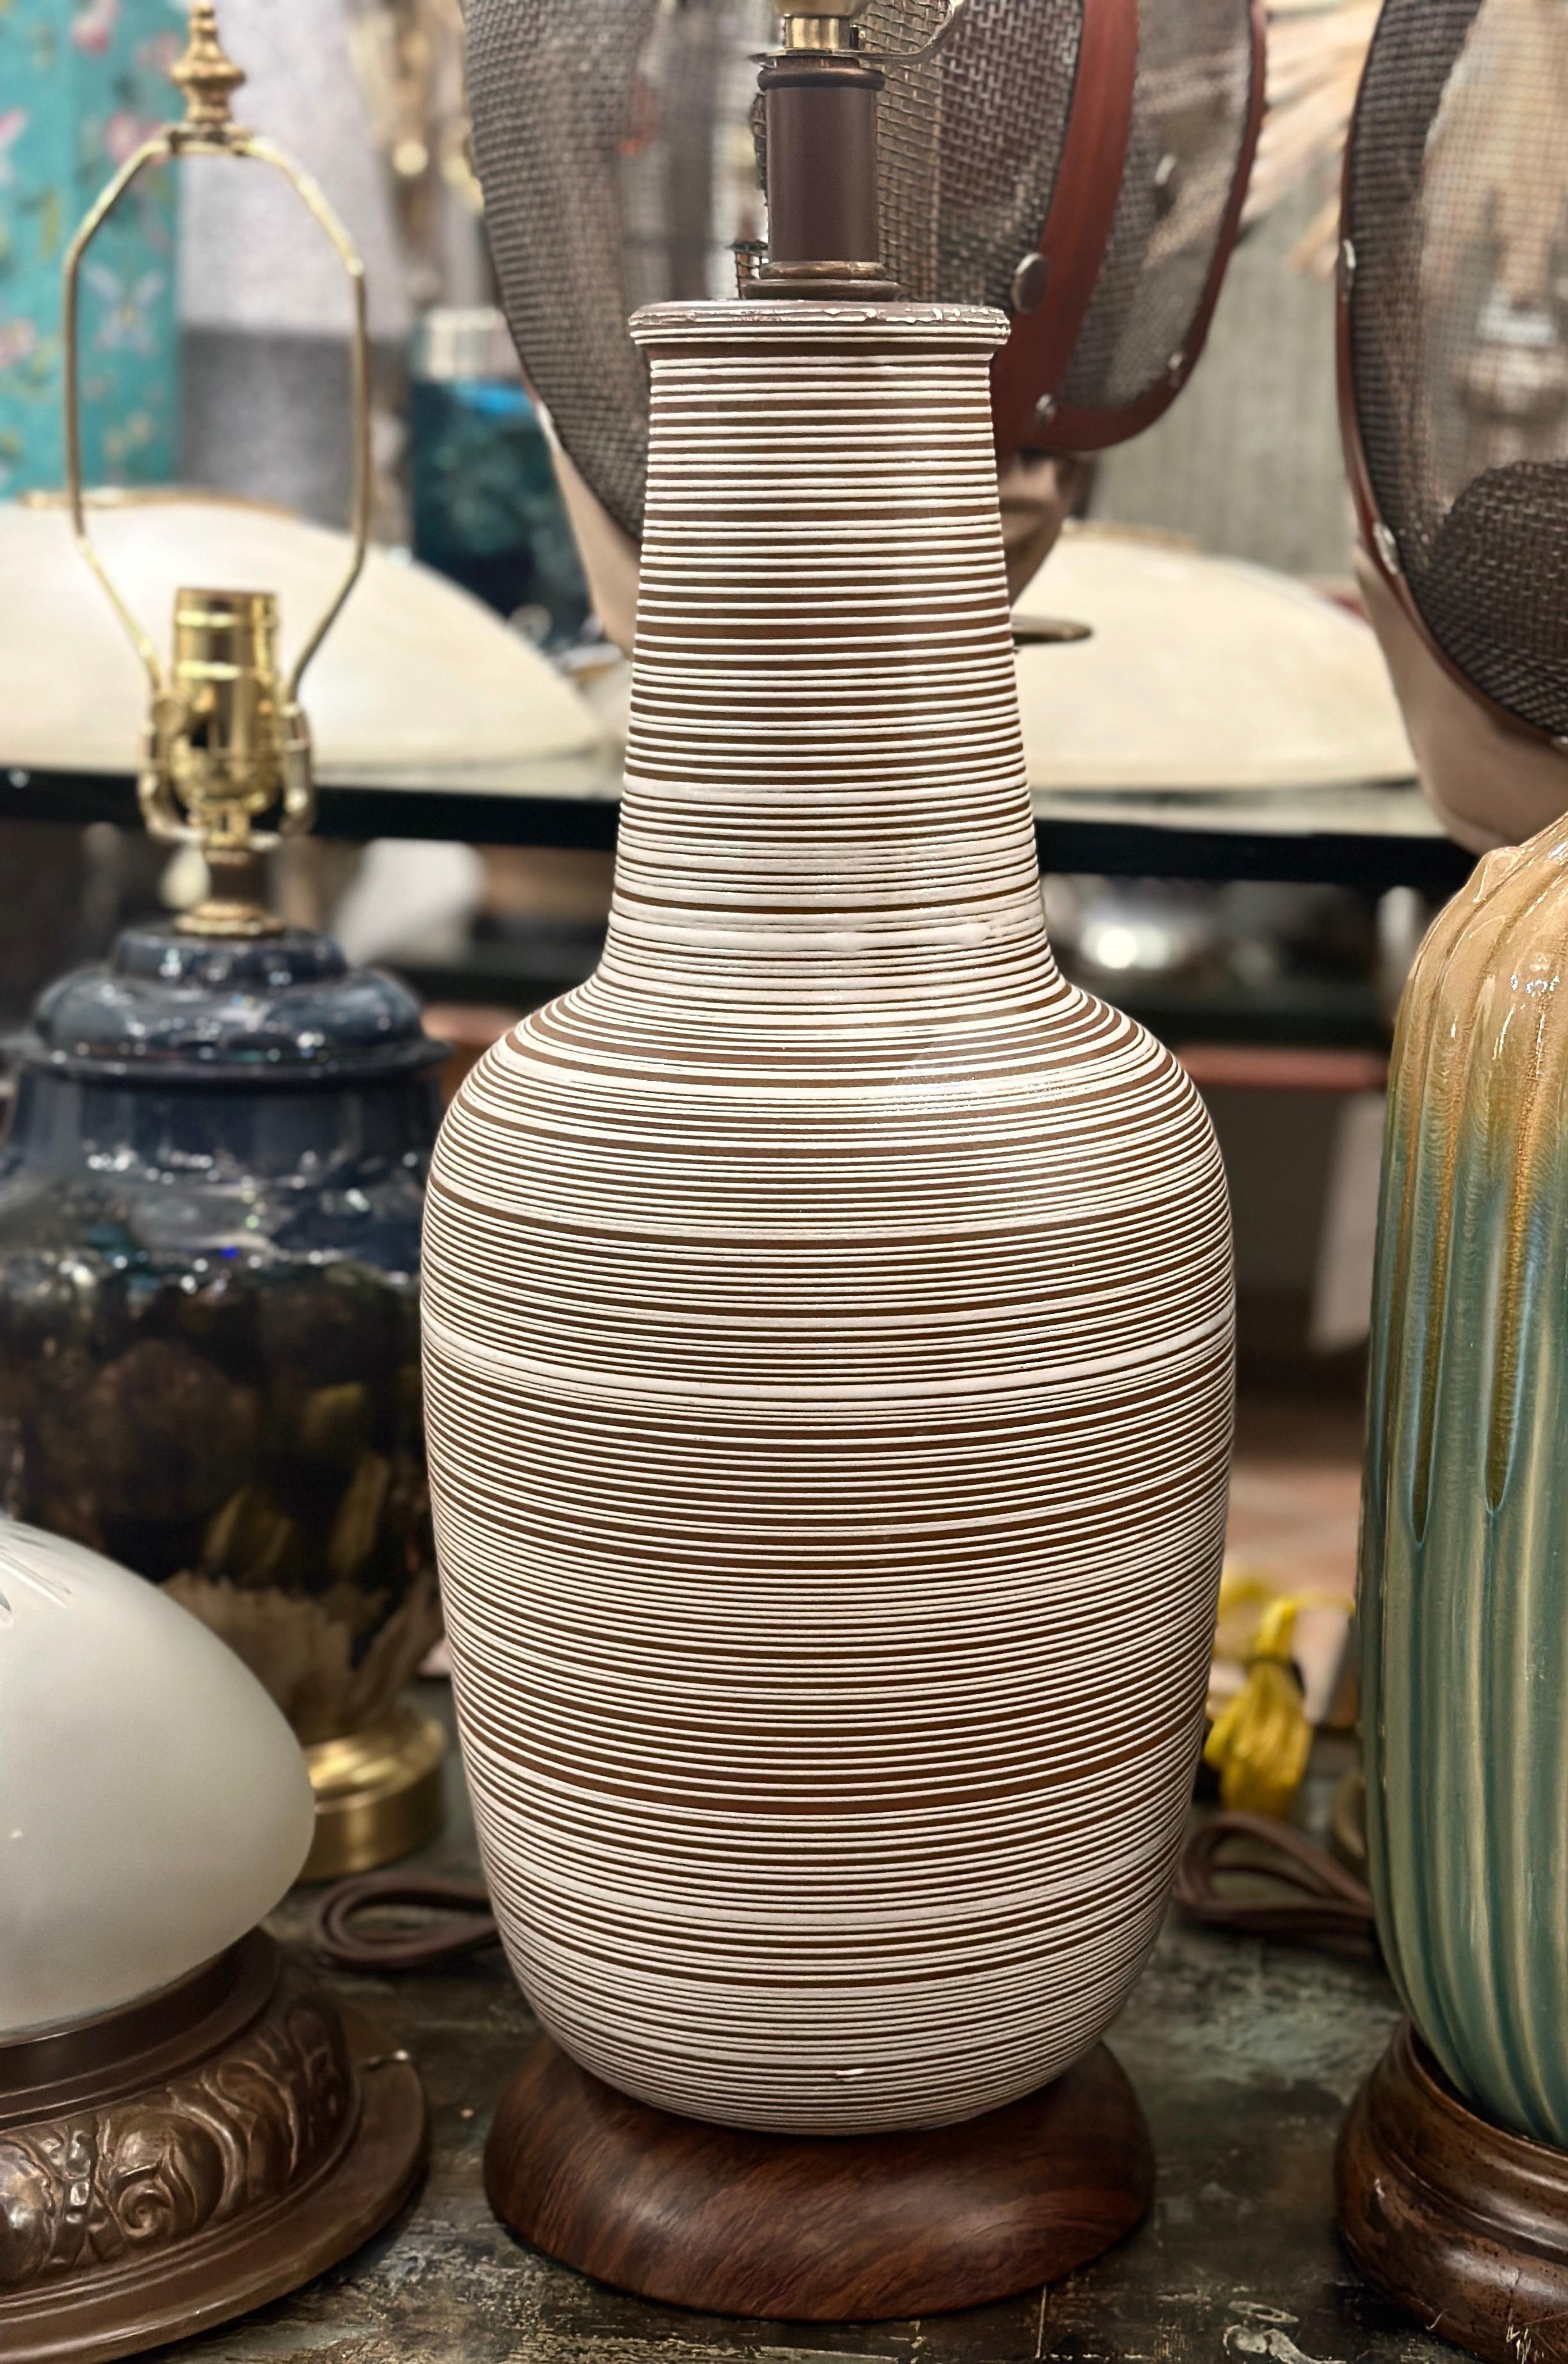 A circa 1960's Italian porcelain lamp with wooden base. 

Measurements:
Height of body: 19